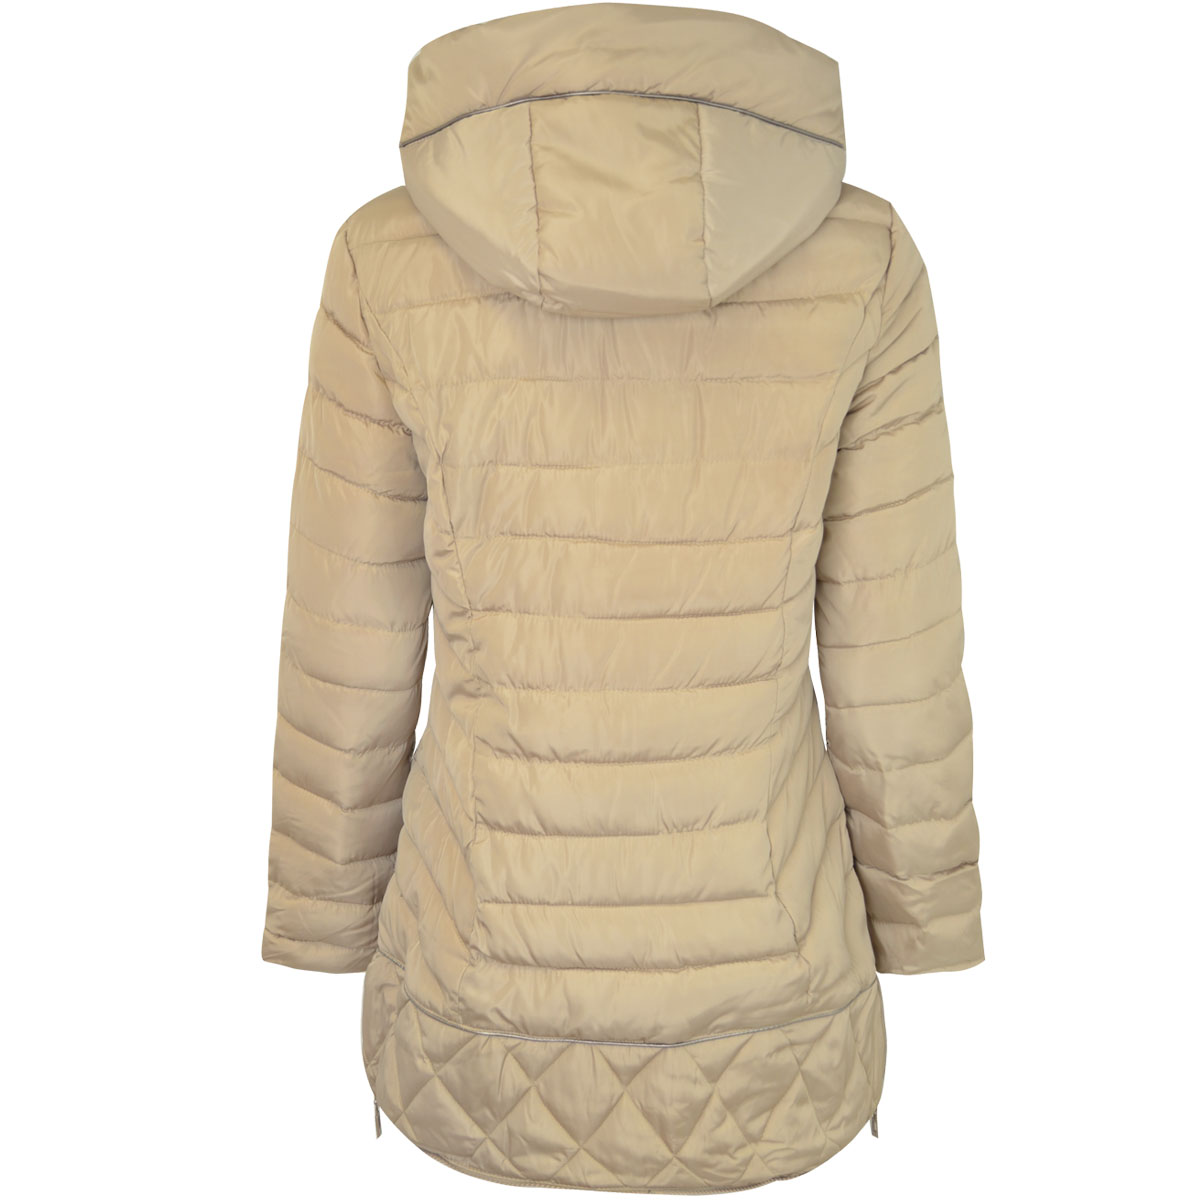 Ladies Womens Long Padded Hooded Quilted Winter Jacket Warm Coat ...